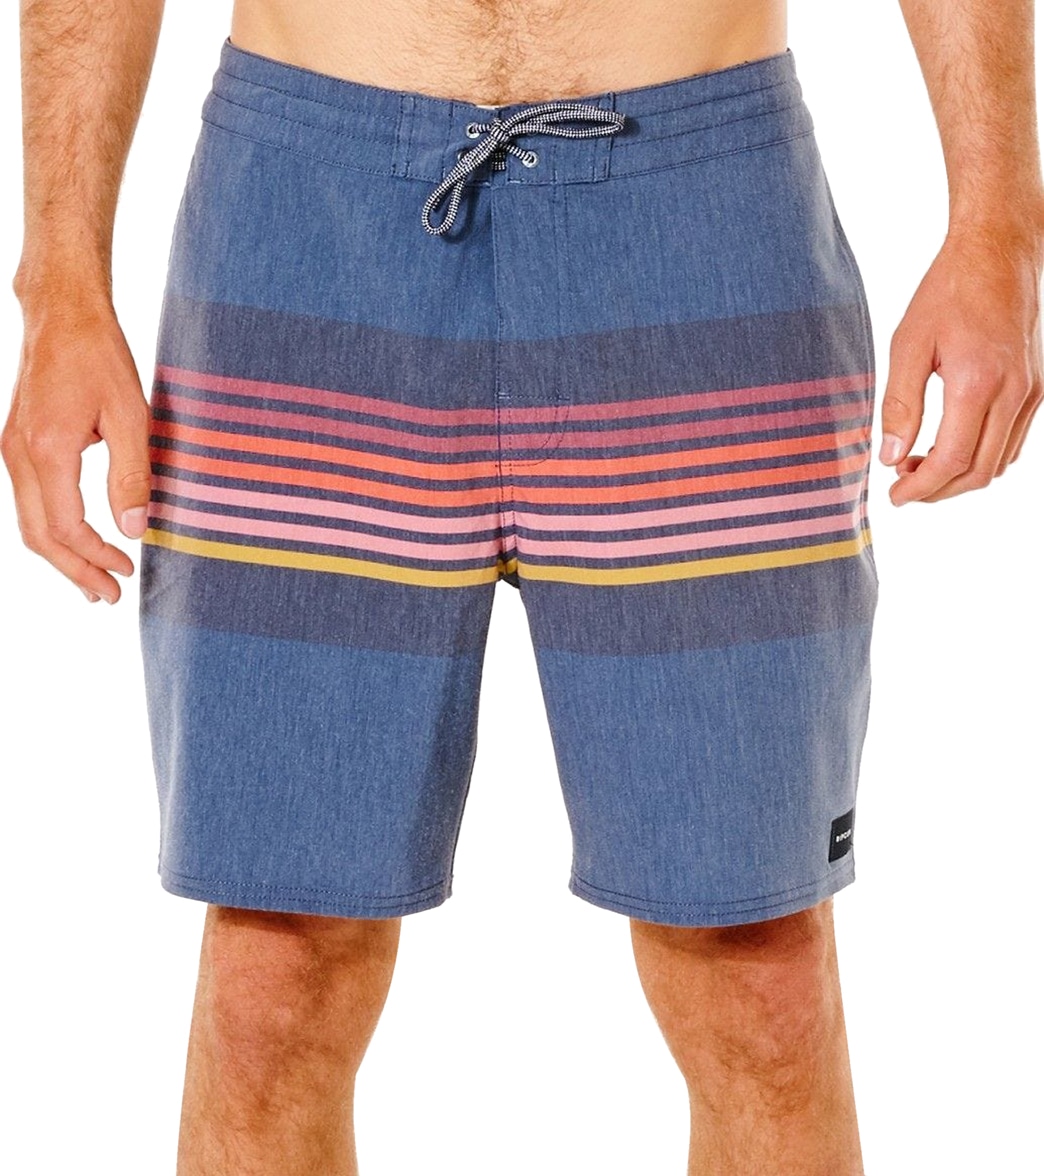 Rip Curl Men's Lineup Layday 19 Boardshorts - Navy 30 - Swimoutlet.com